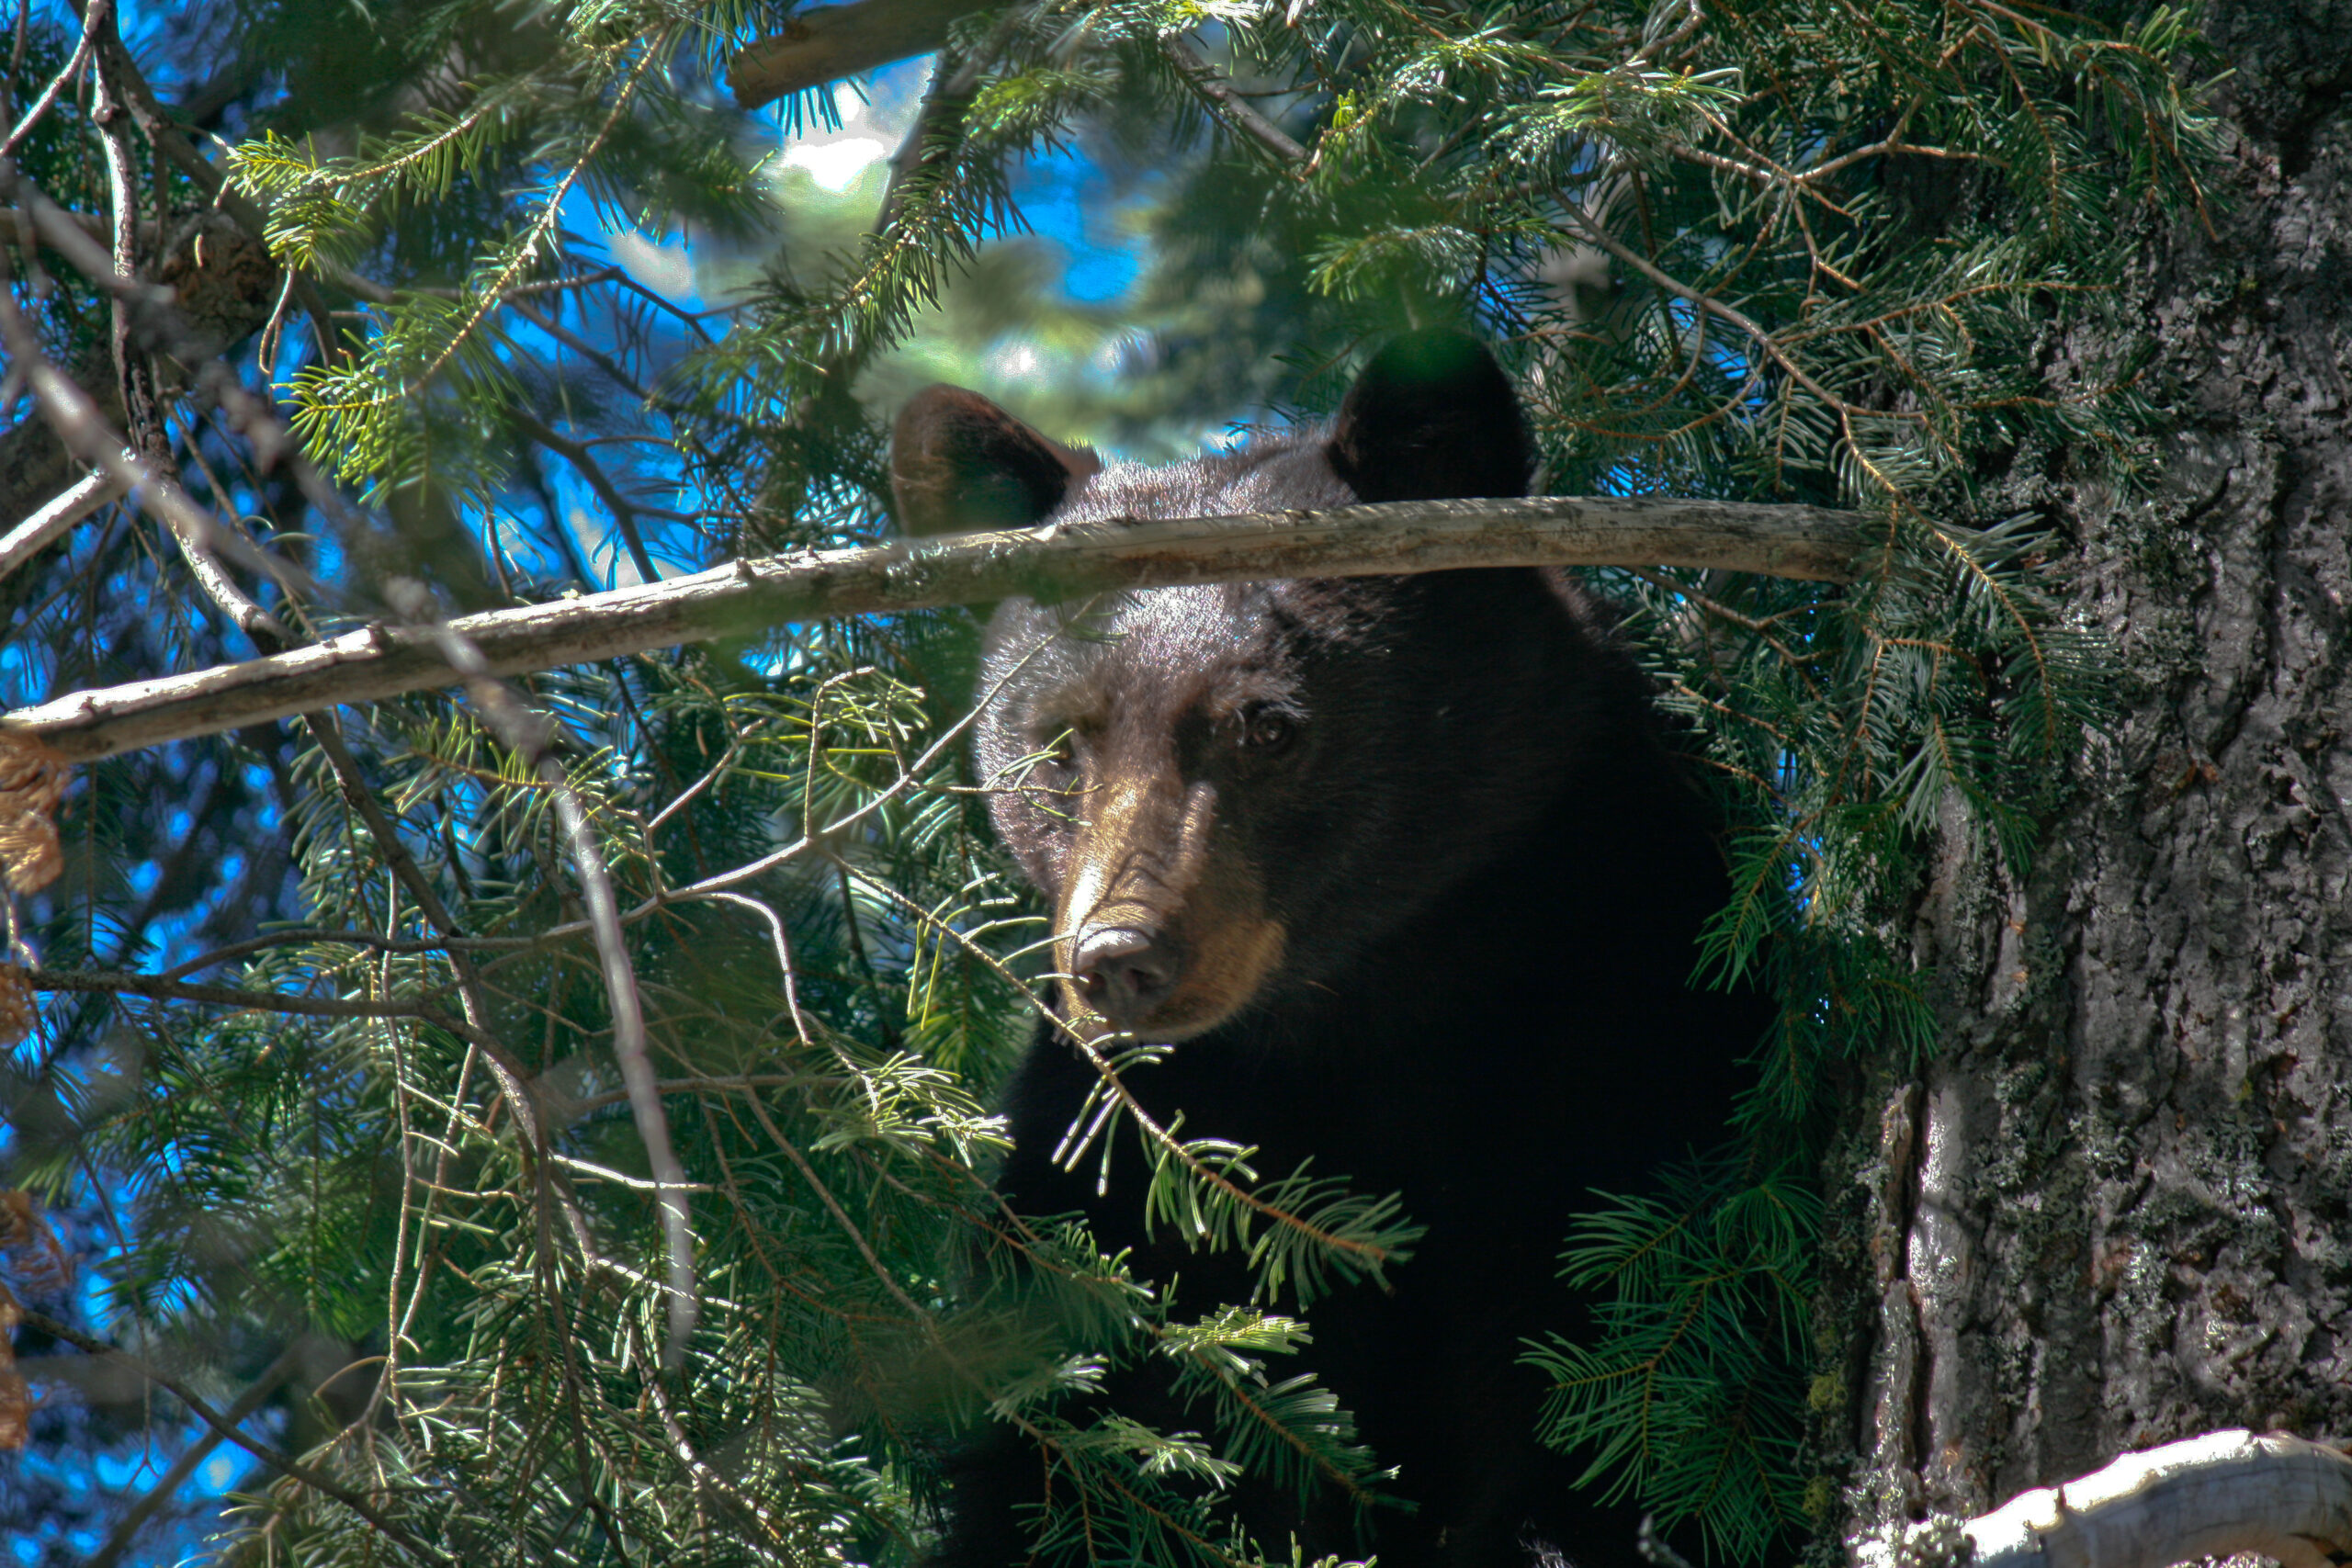 A California black bear in a tree, an uncommon sight since bear hunting with hounds was banned.